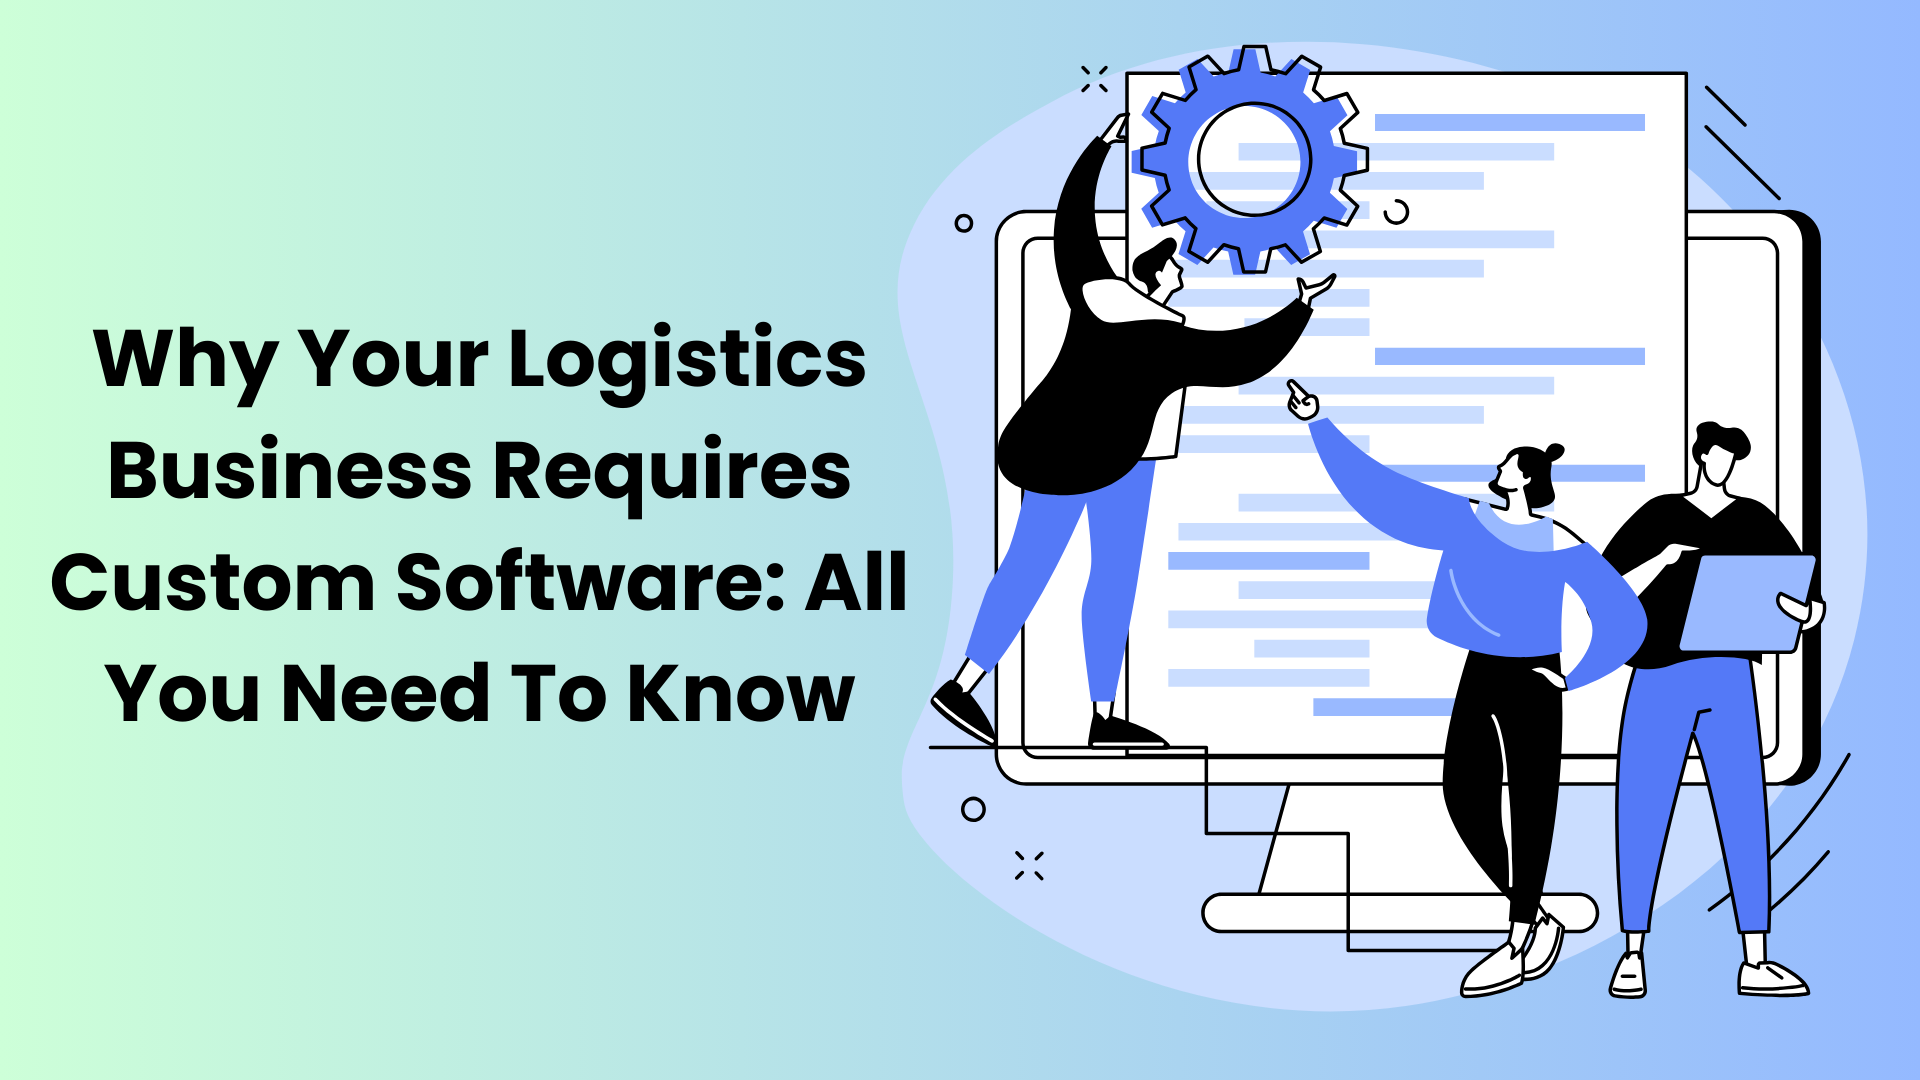 Why Your Logistics Business Requires Custom Software: